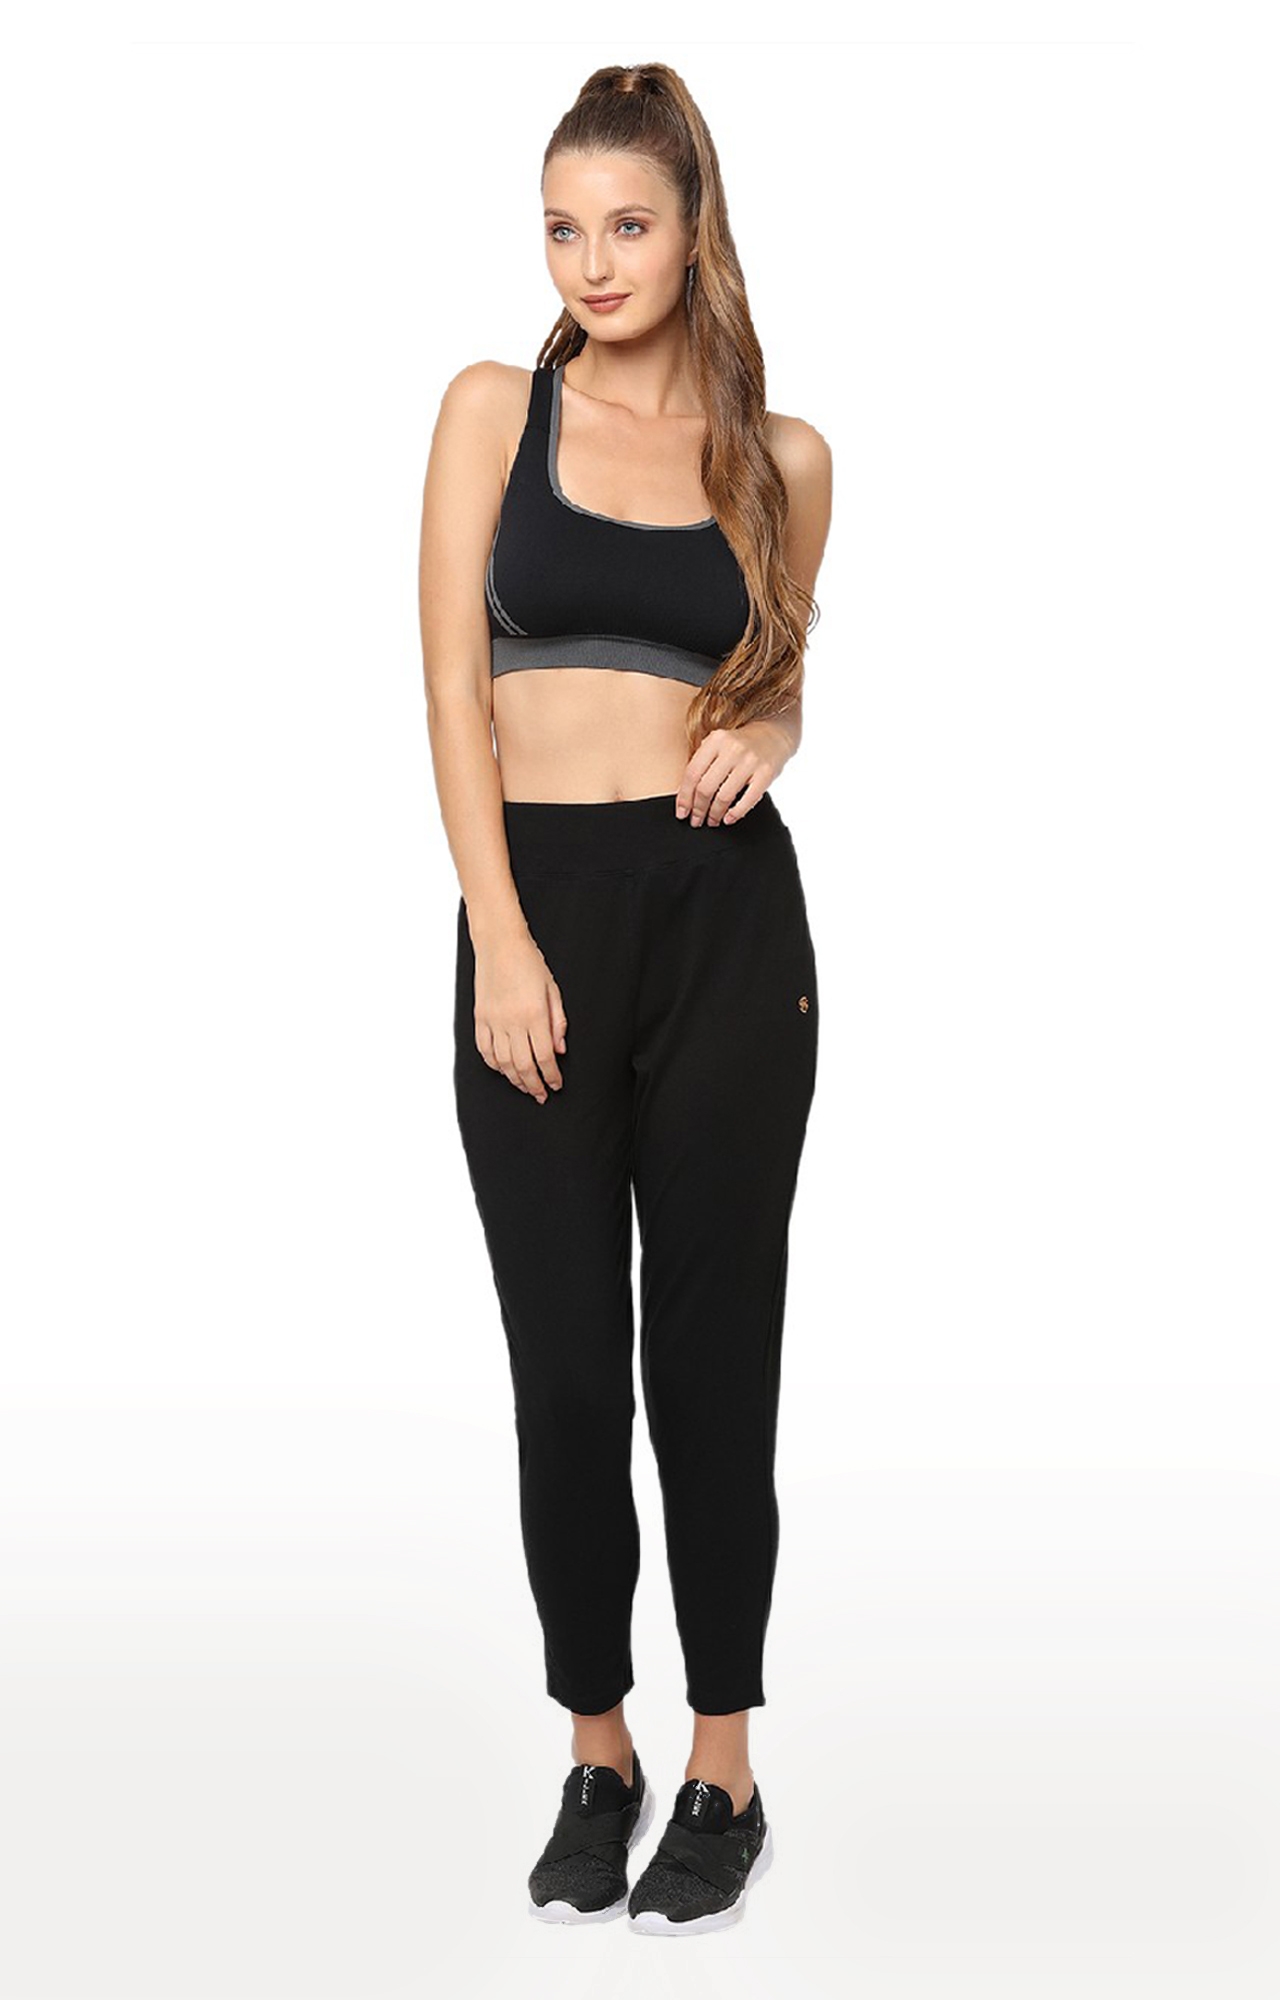 Maysixty Women's Black Cotton Spandex Solid Yoga Pant